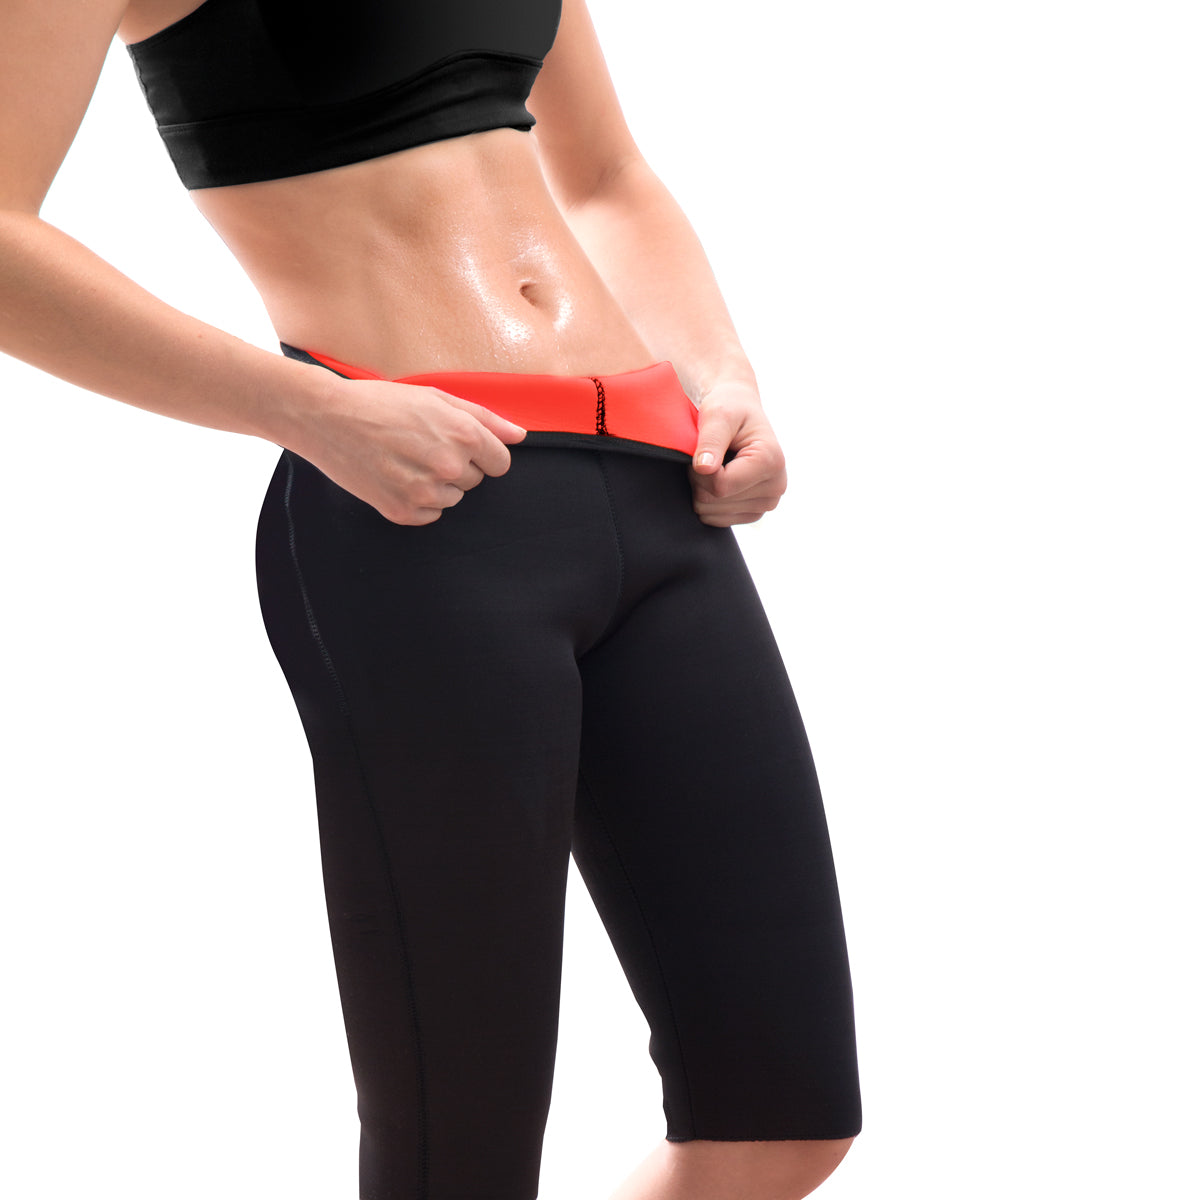 Slimming Knee Length Sports Leggings with Sauna Effect Swaglia InnovaG –